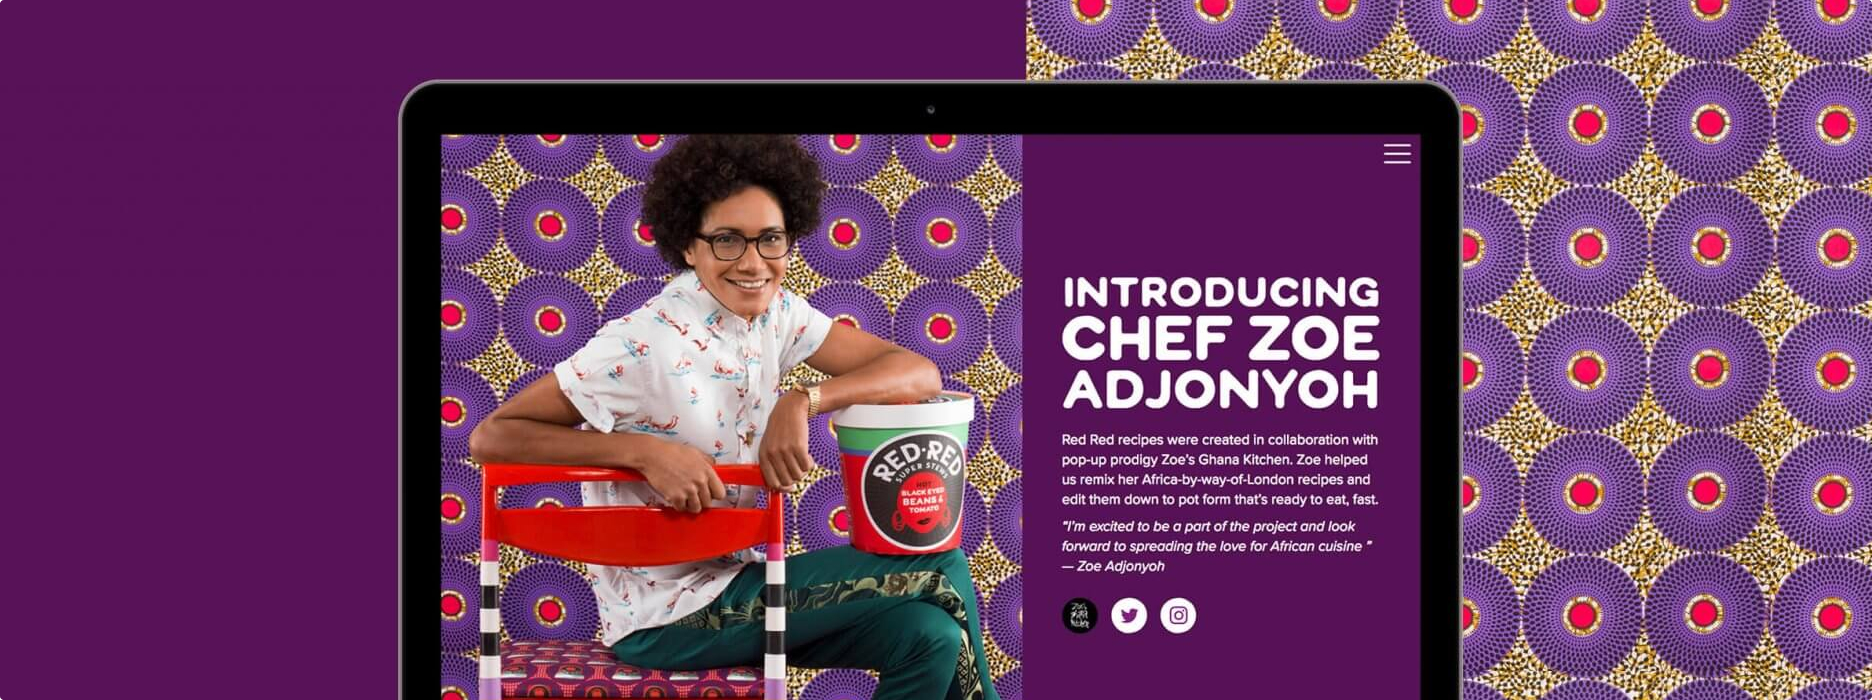 Image of the Red Red website on a laptop, the page is introducing chef Zoe. The laptop sits on a vibrant, patterned, purple background 